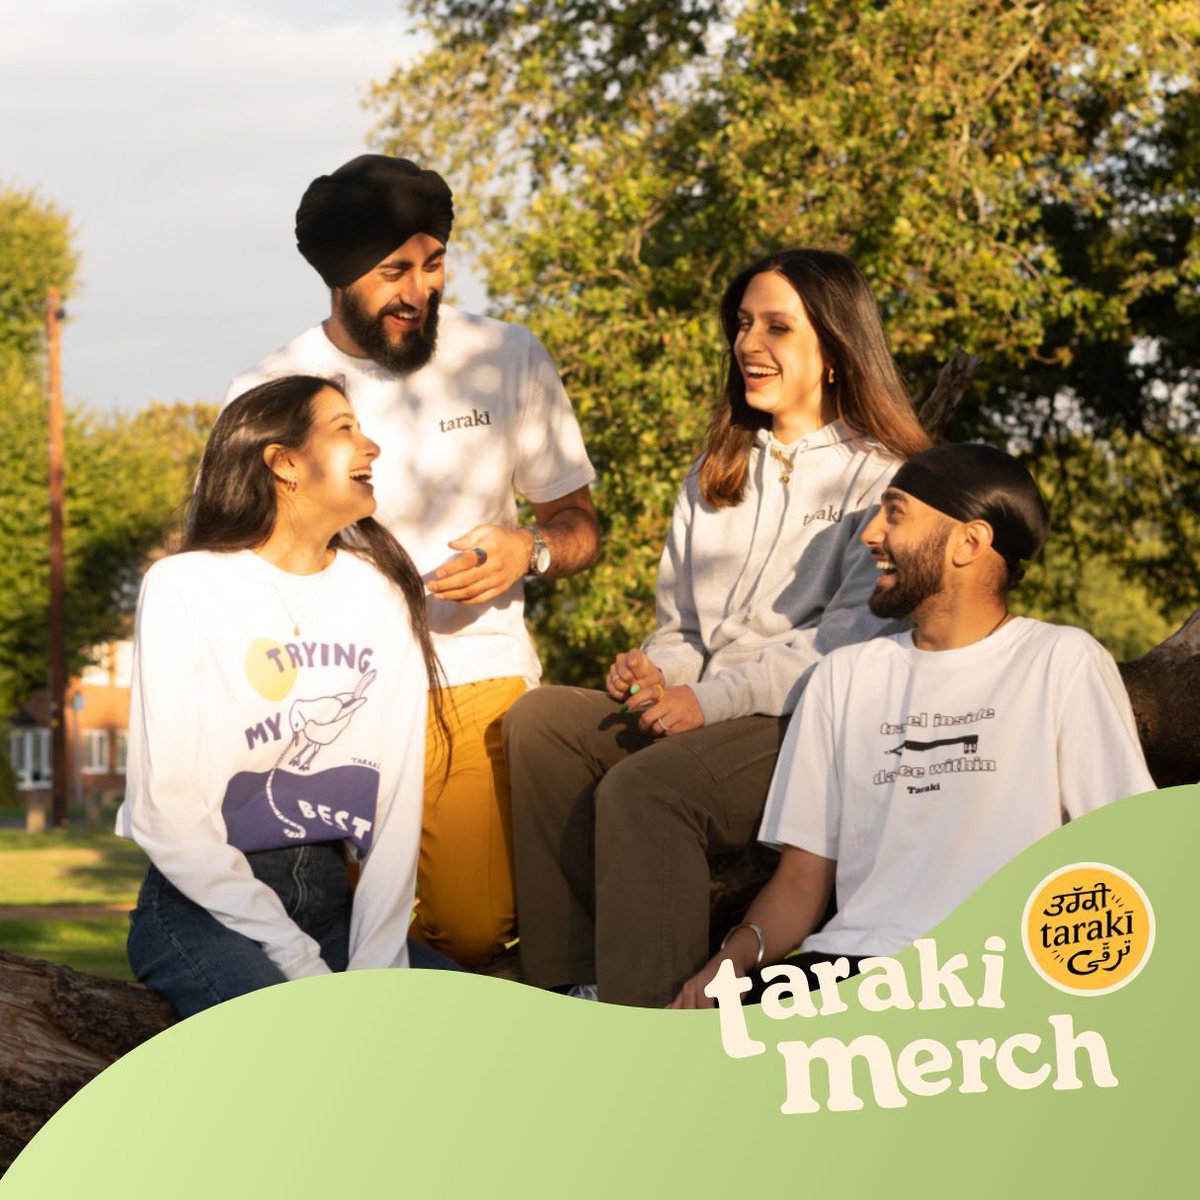 add a meaningful item to your wardrobe, while supporting taraki's movement! all proceeds go towards supporting our work reshaping approaches to mental health with punjabi communities. follow the link below to order your merch today! 💫 everpress.com/profile/taraki